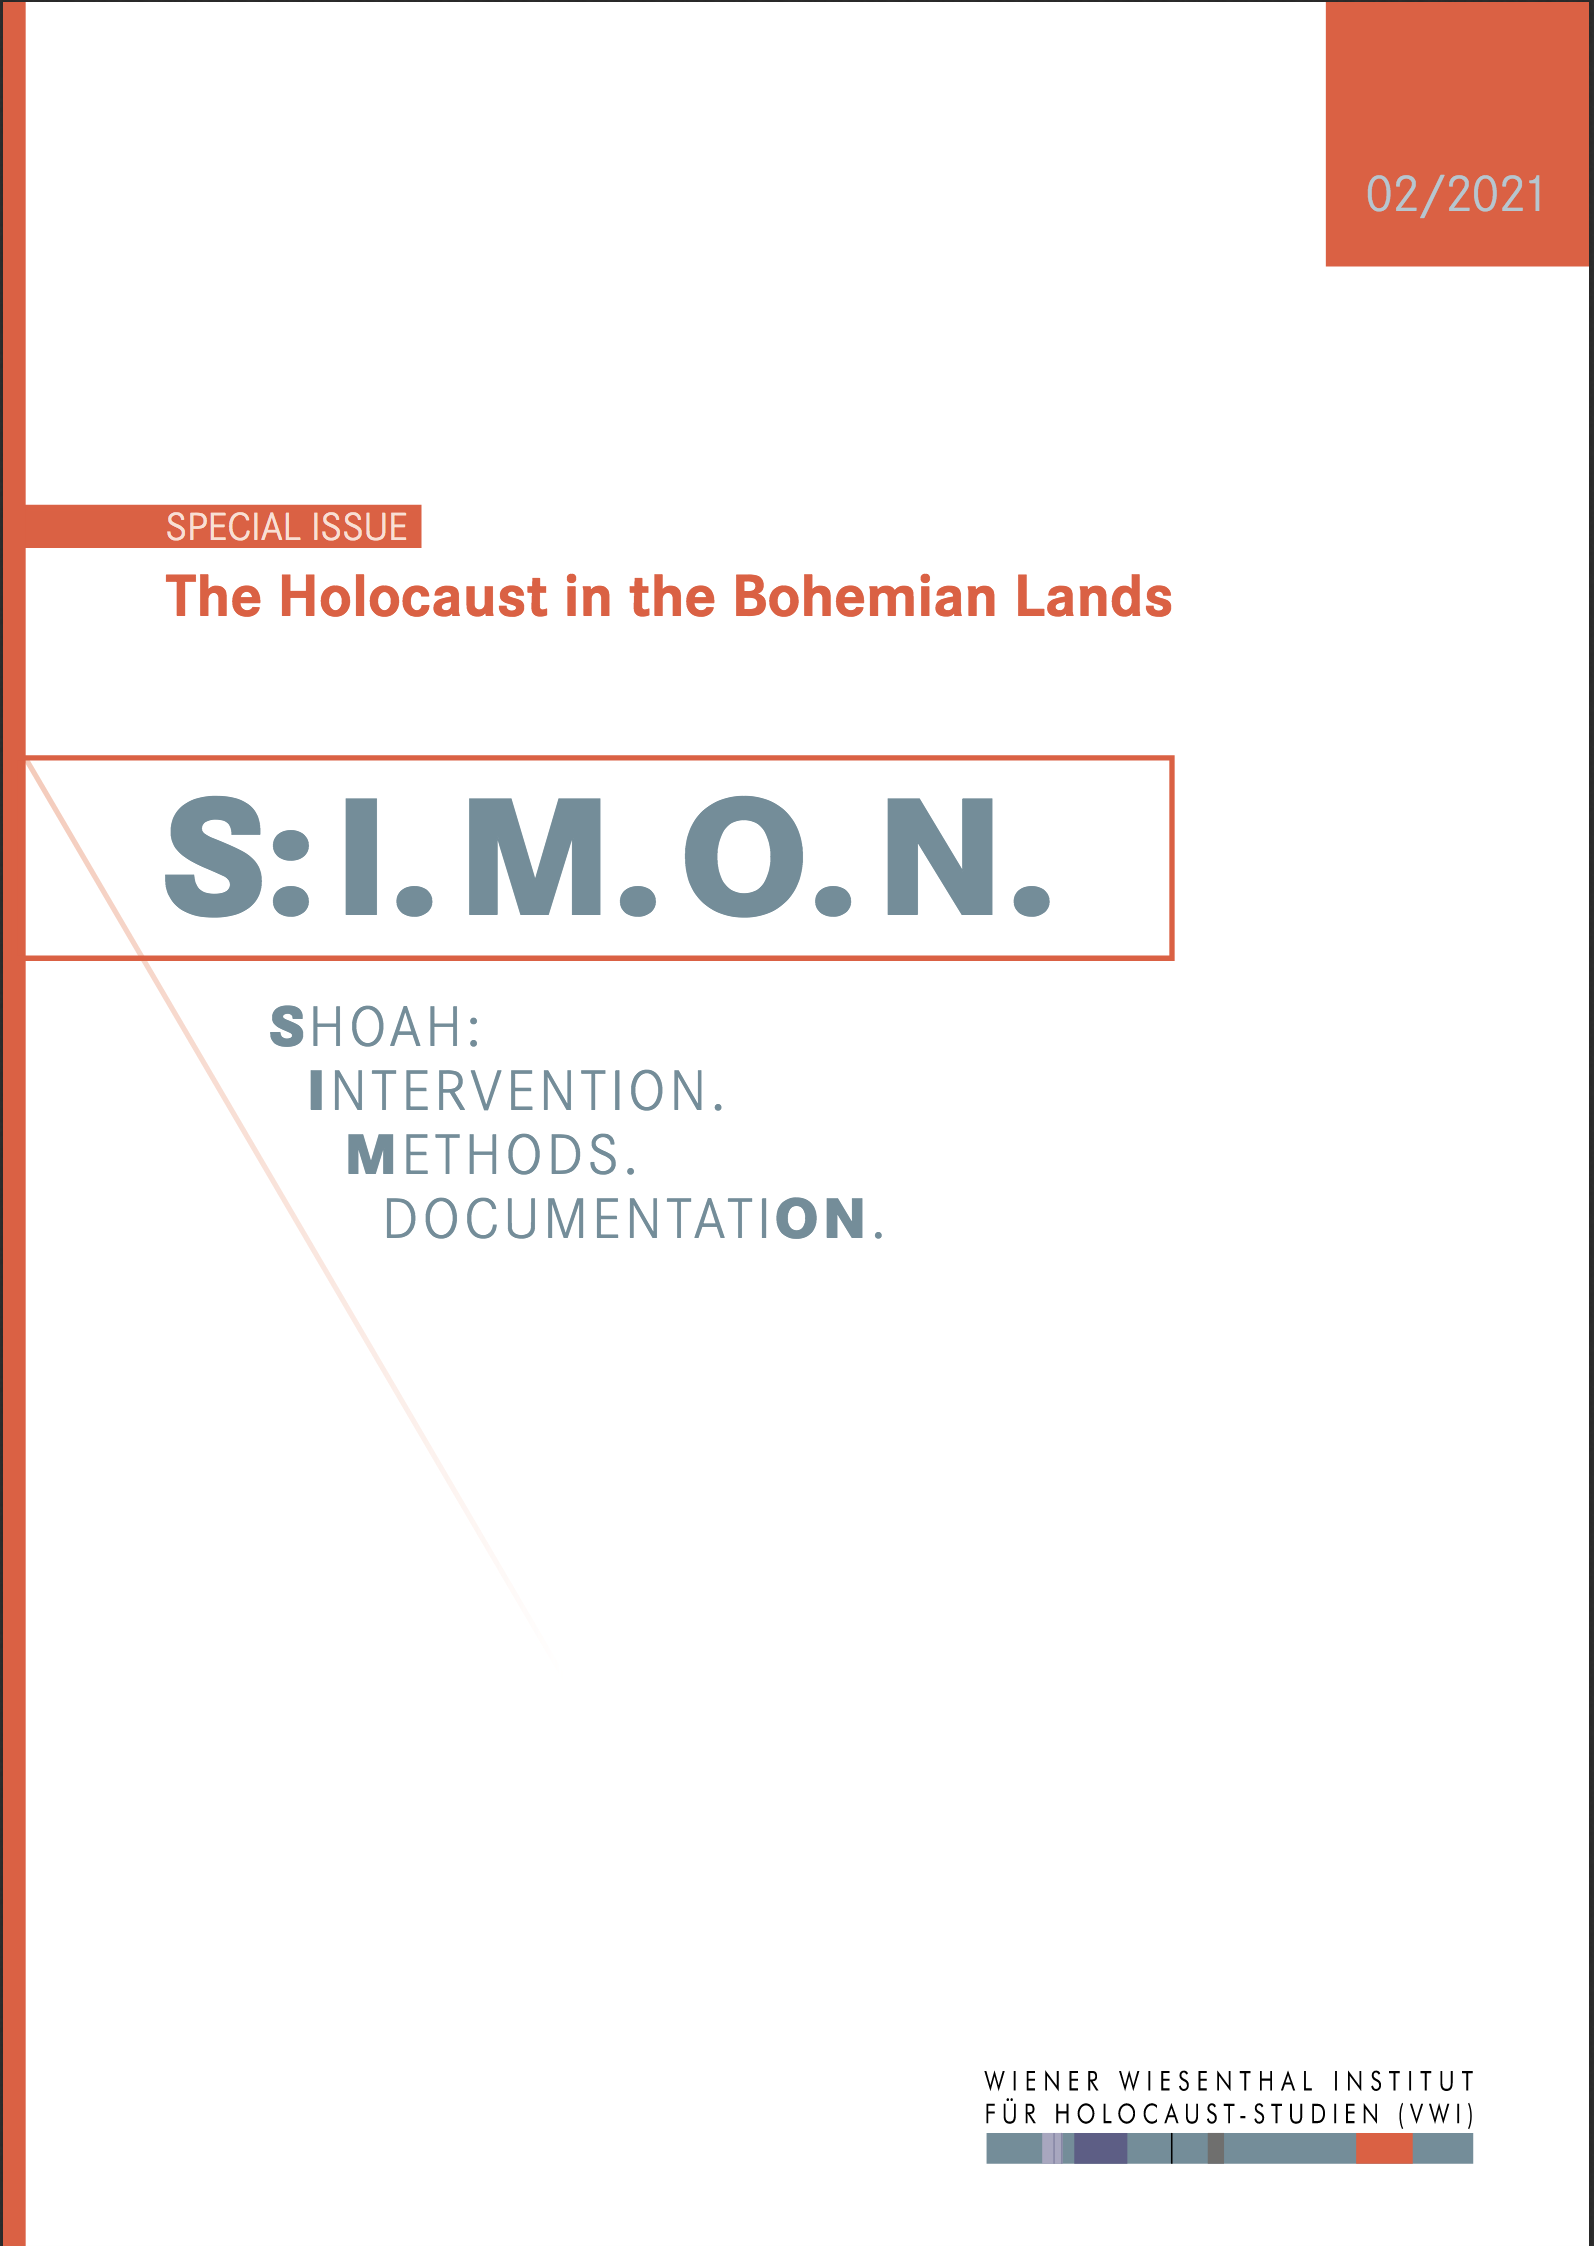 Holocaust History in the Bohemian Lands. Research Questions and Voids, Sources and Data